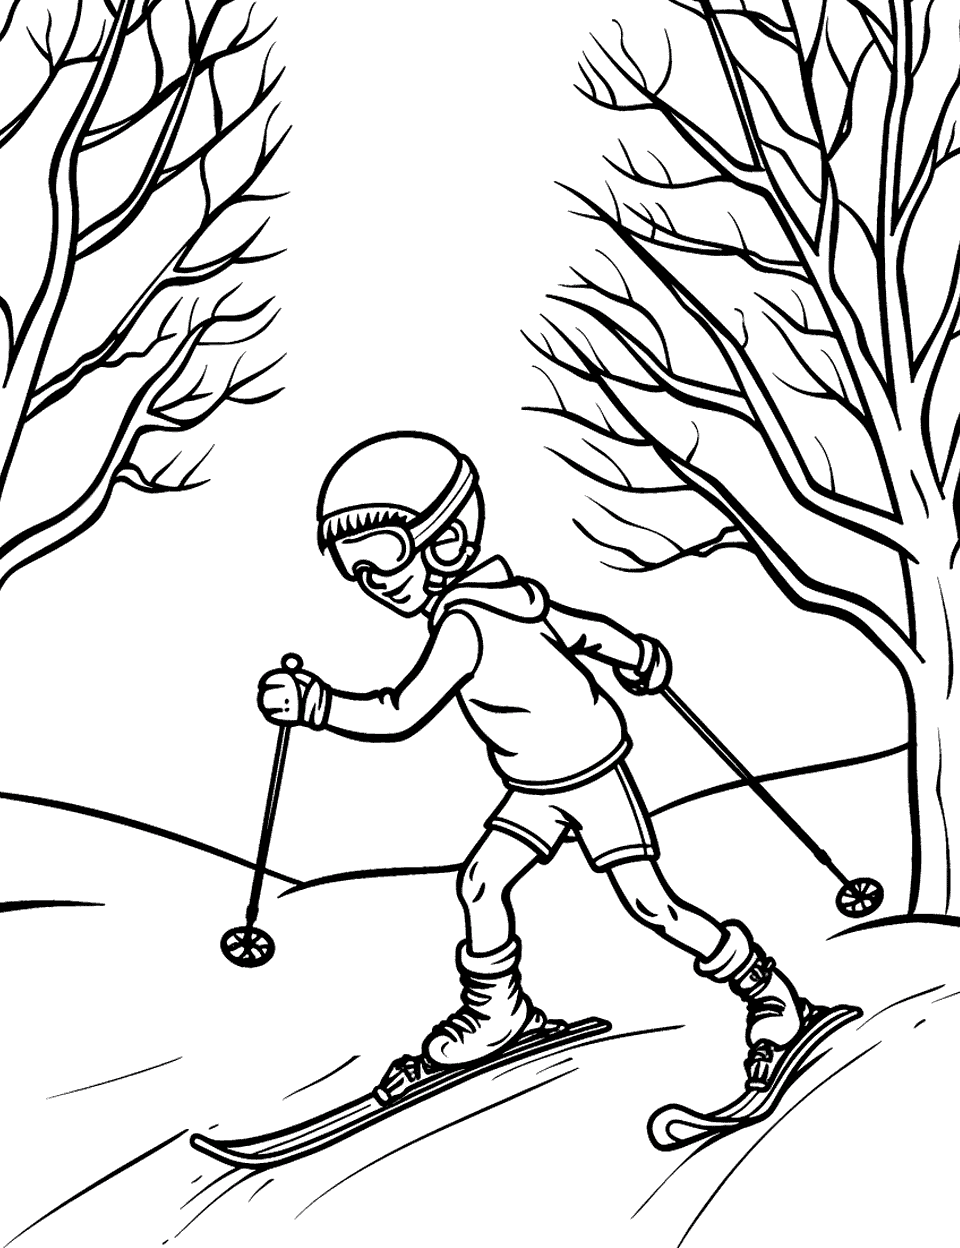 Winter Wonderland Skiing Sports Coloring Page - A person skiing down a gentle slope with snow-dried trees on either side.